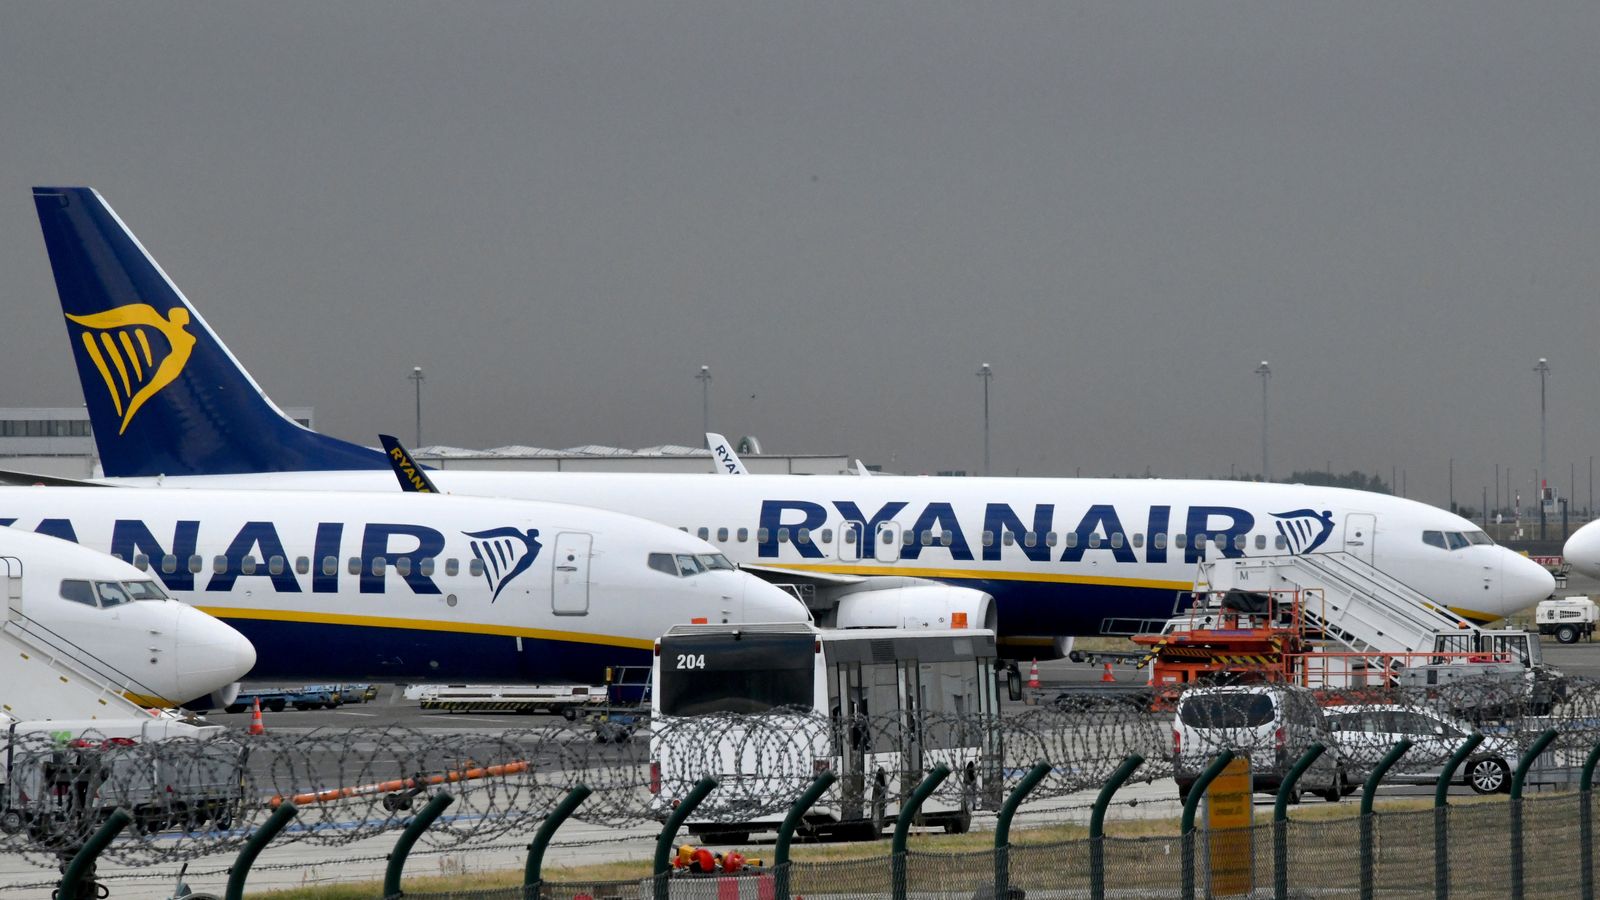 Ryanair strikes: Passengers can be compensated for 2018 flight cancellations, airline agrees